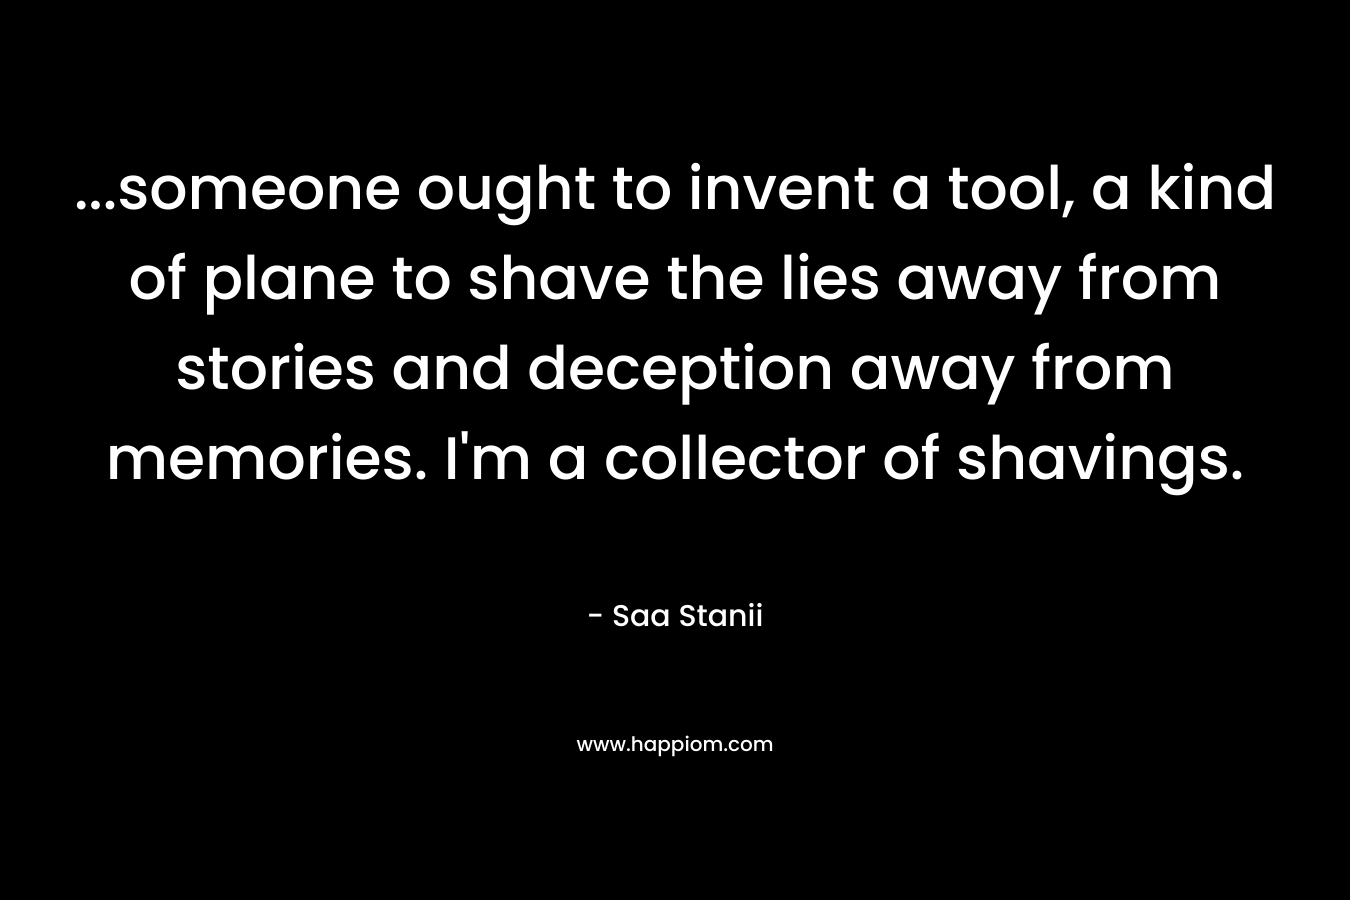 ...someone ought to invent a tool, a kind of plane to shave the lies away from stories and deception away from memories. I'm a collector of shavings.